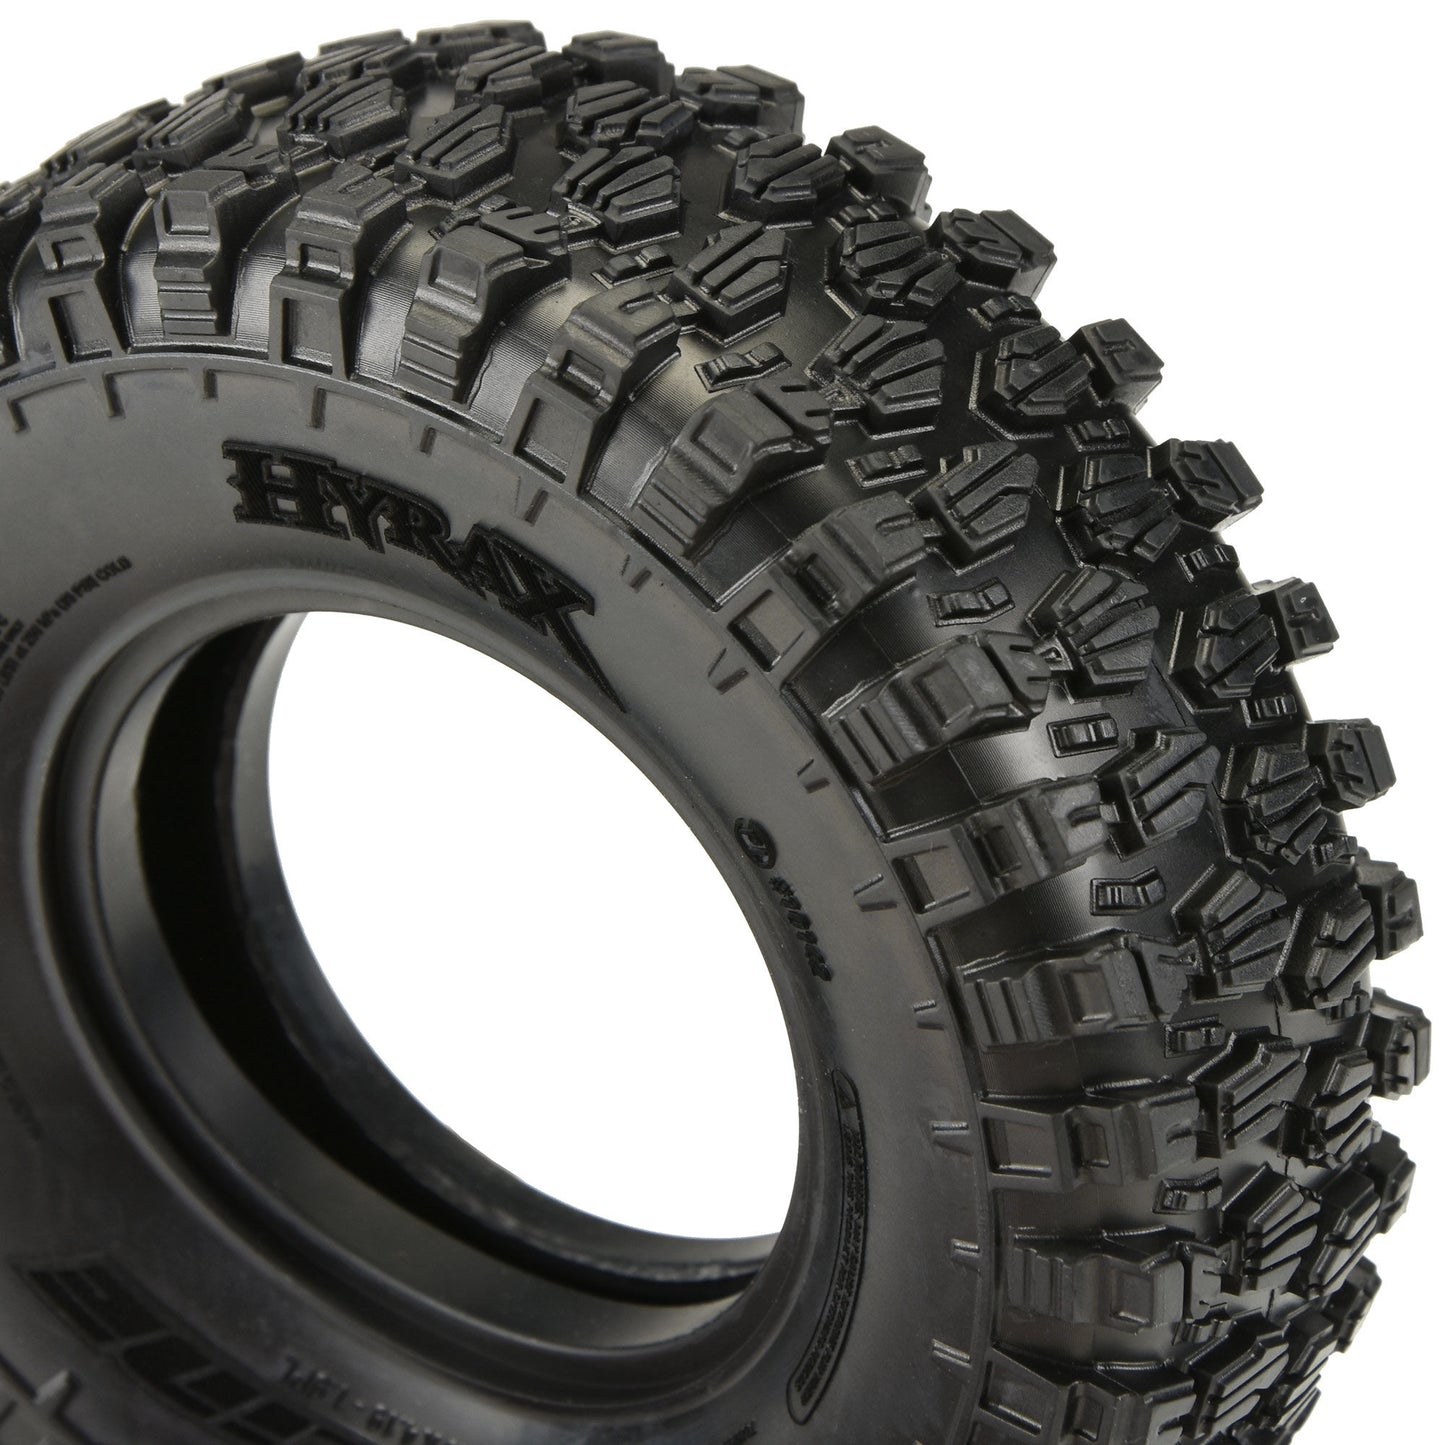 Pro-Line® 1/10 Class 1 Hyrax G8 Front/Rear 1.9" Rock Crawling Tires (2)